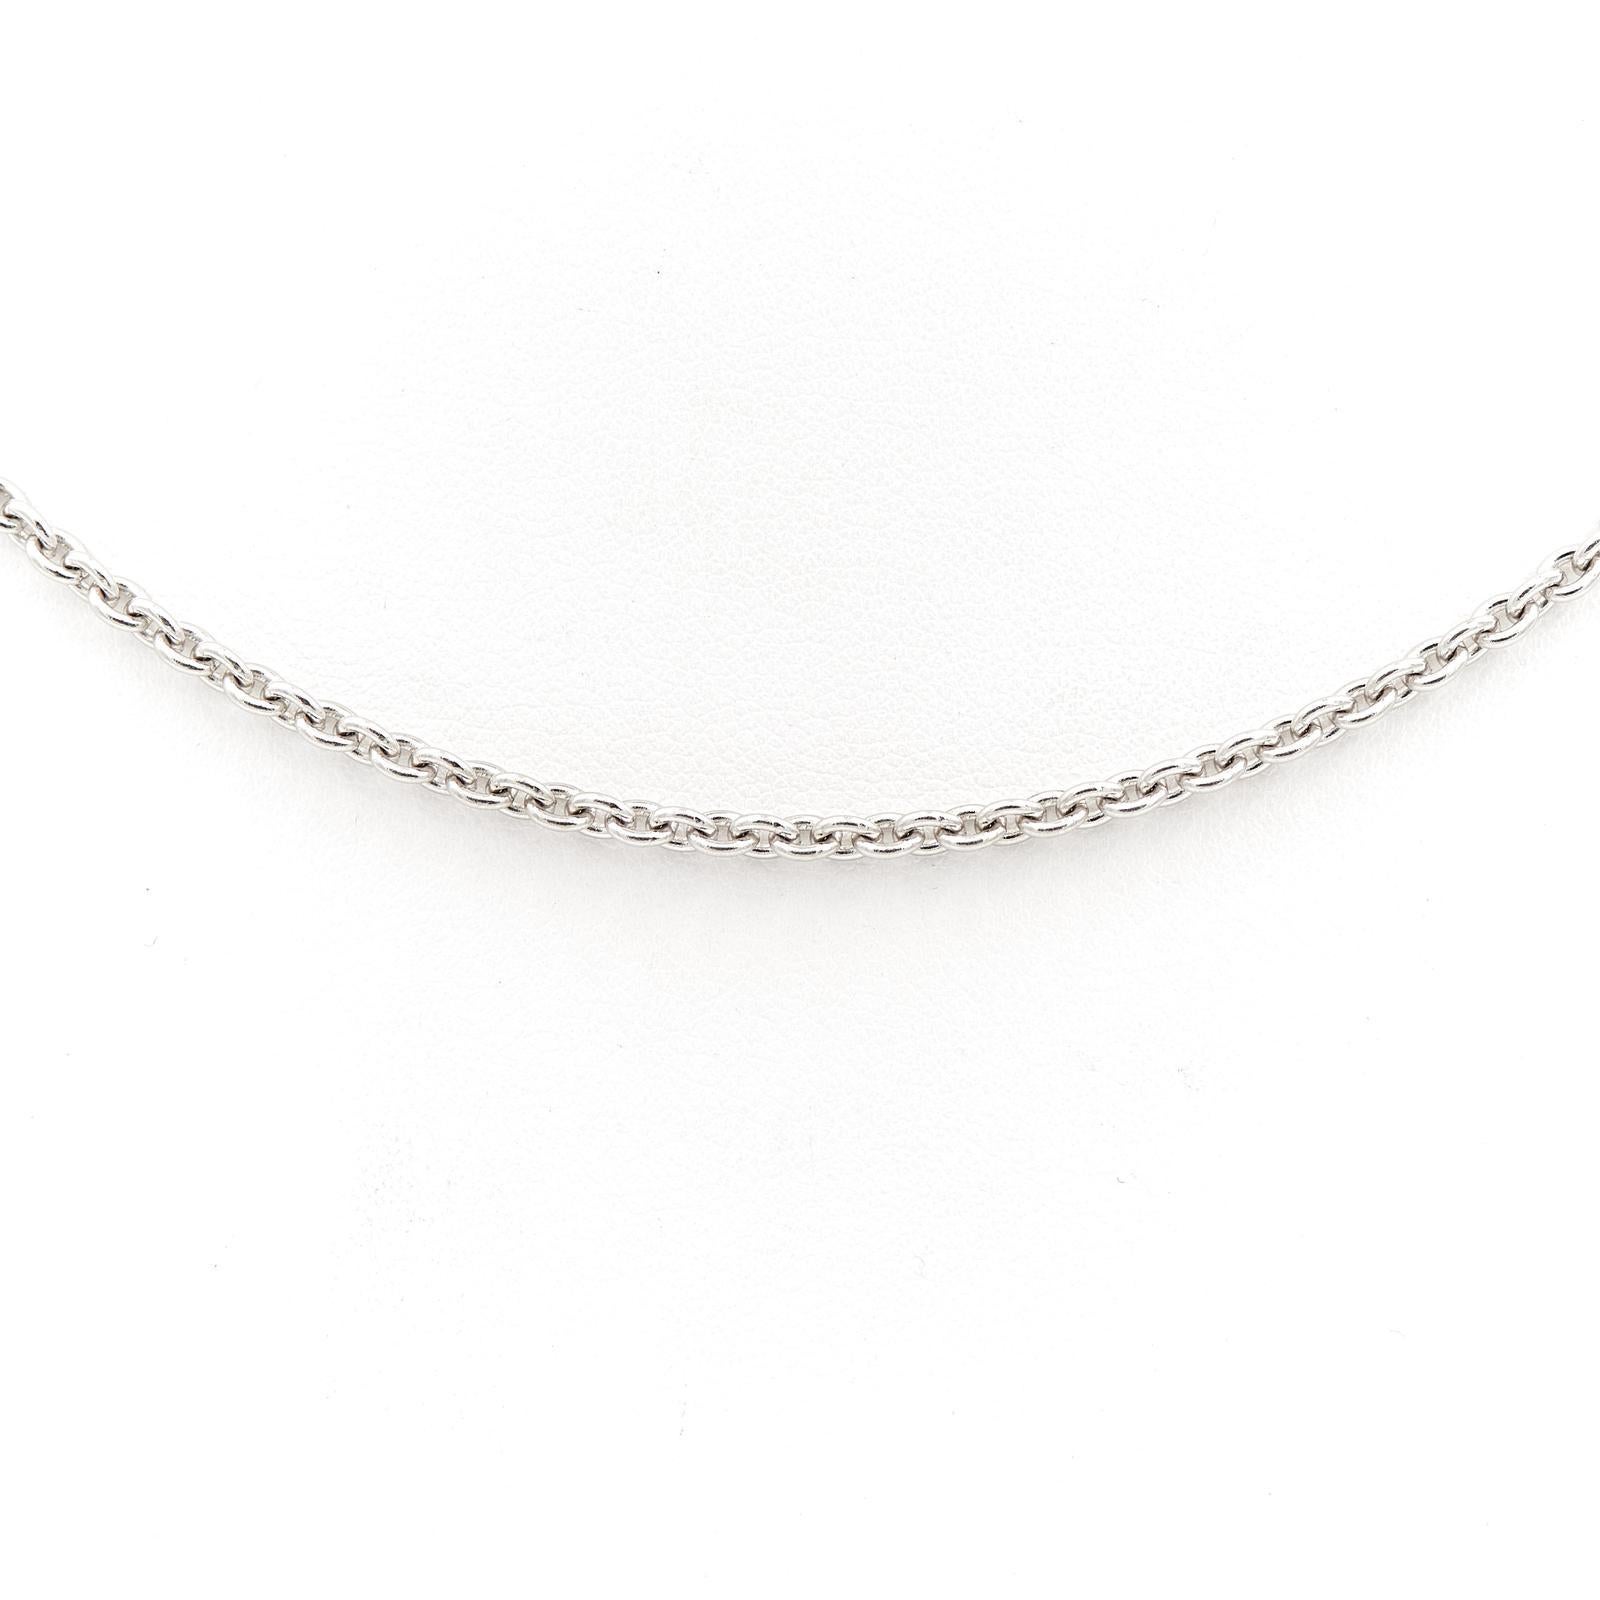 Necklace in white gold 750 thousandths (18 carats). soft mesh chain. length: 44.5 cm. width: 0.28 cm. total weight: 12.39 g. eagle head hallmark. excellent condition.
